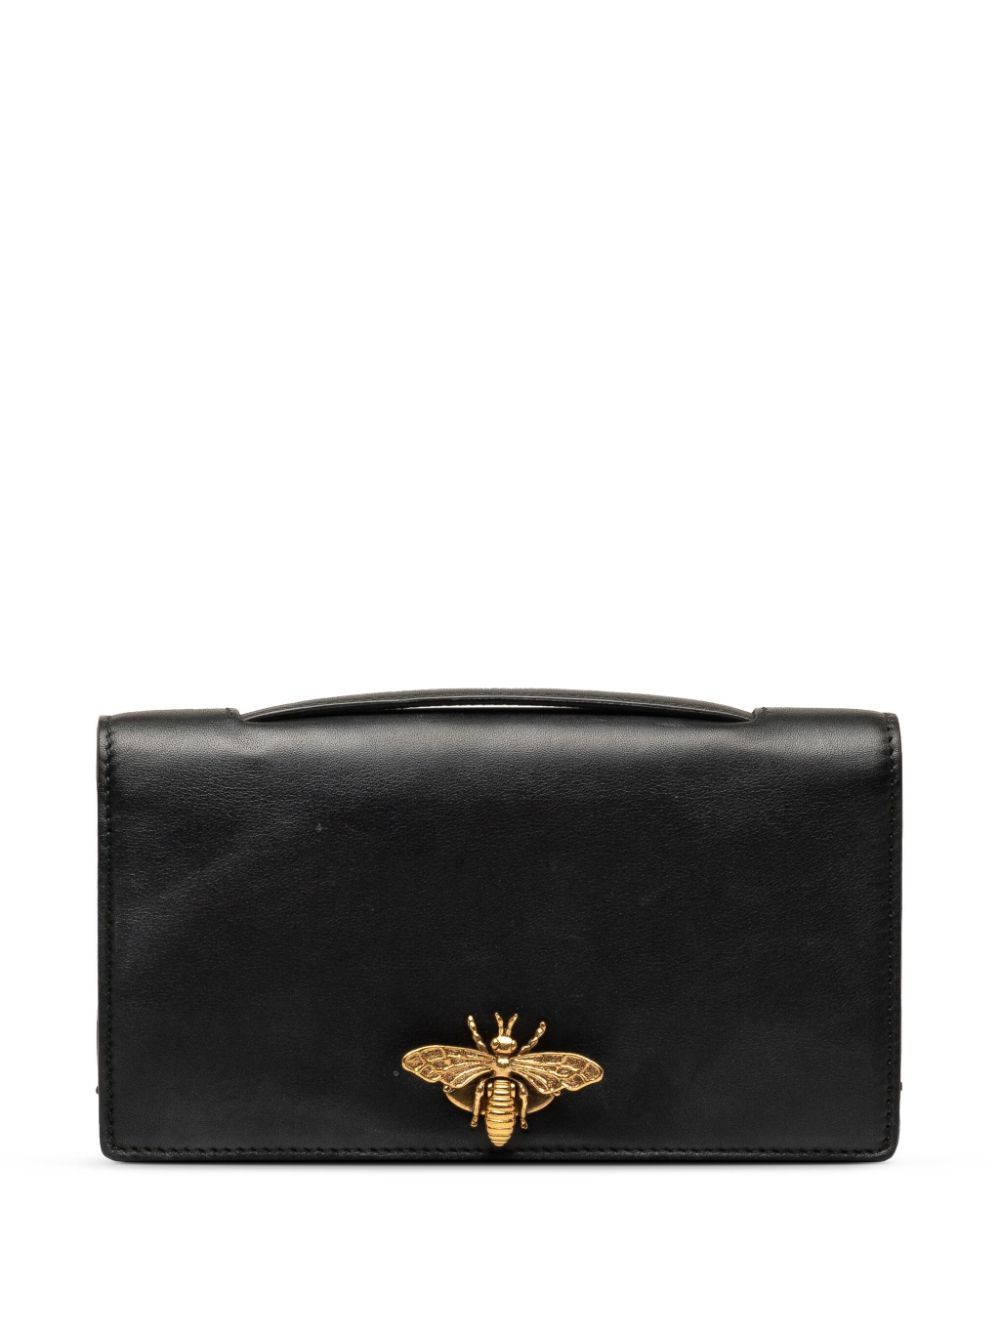 Pre-owned Dior 2017 Leather Bee Clutch Bag In Black